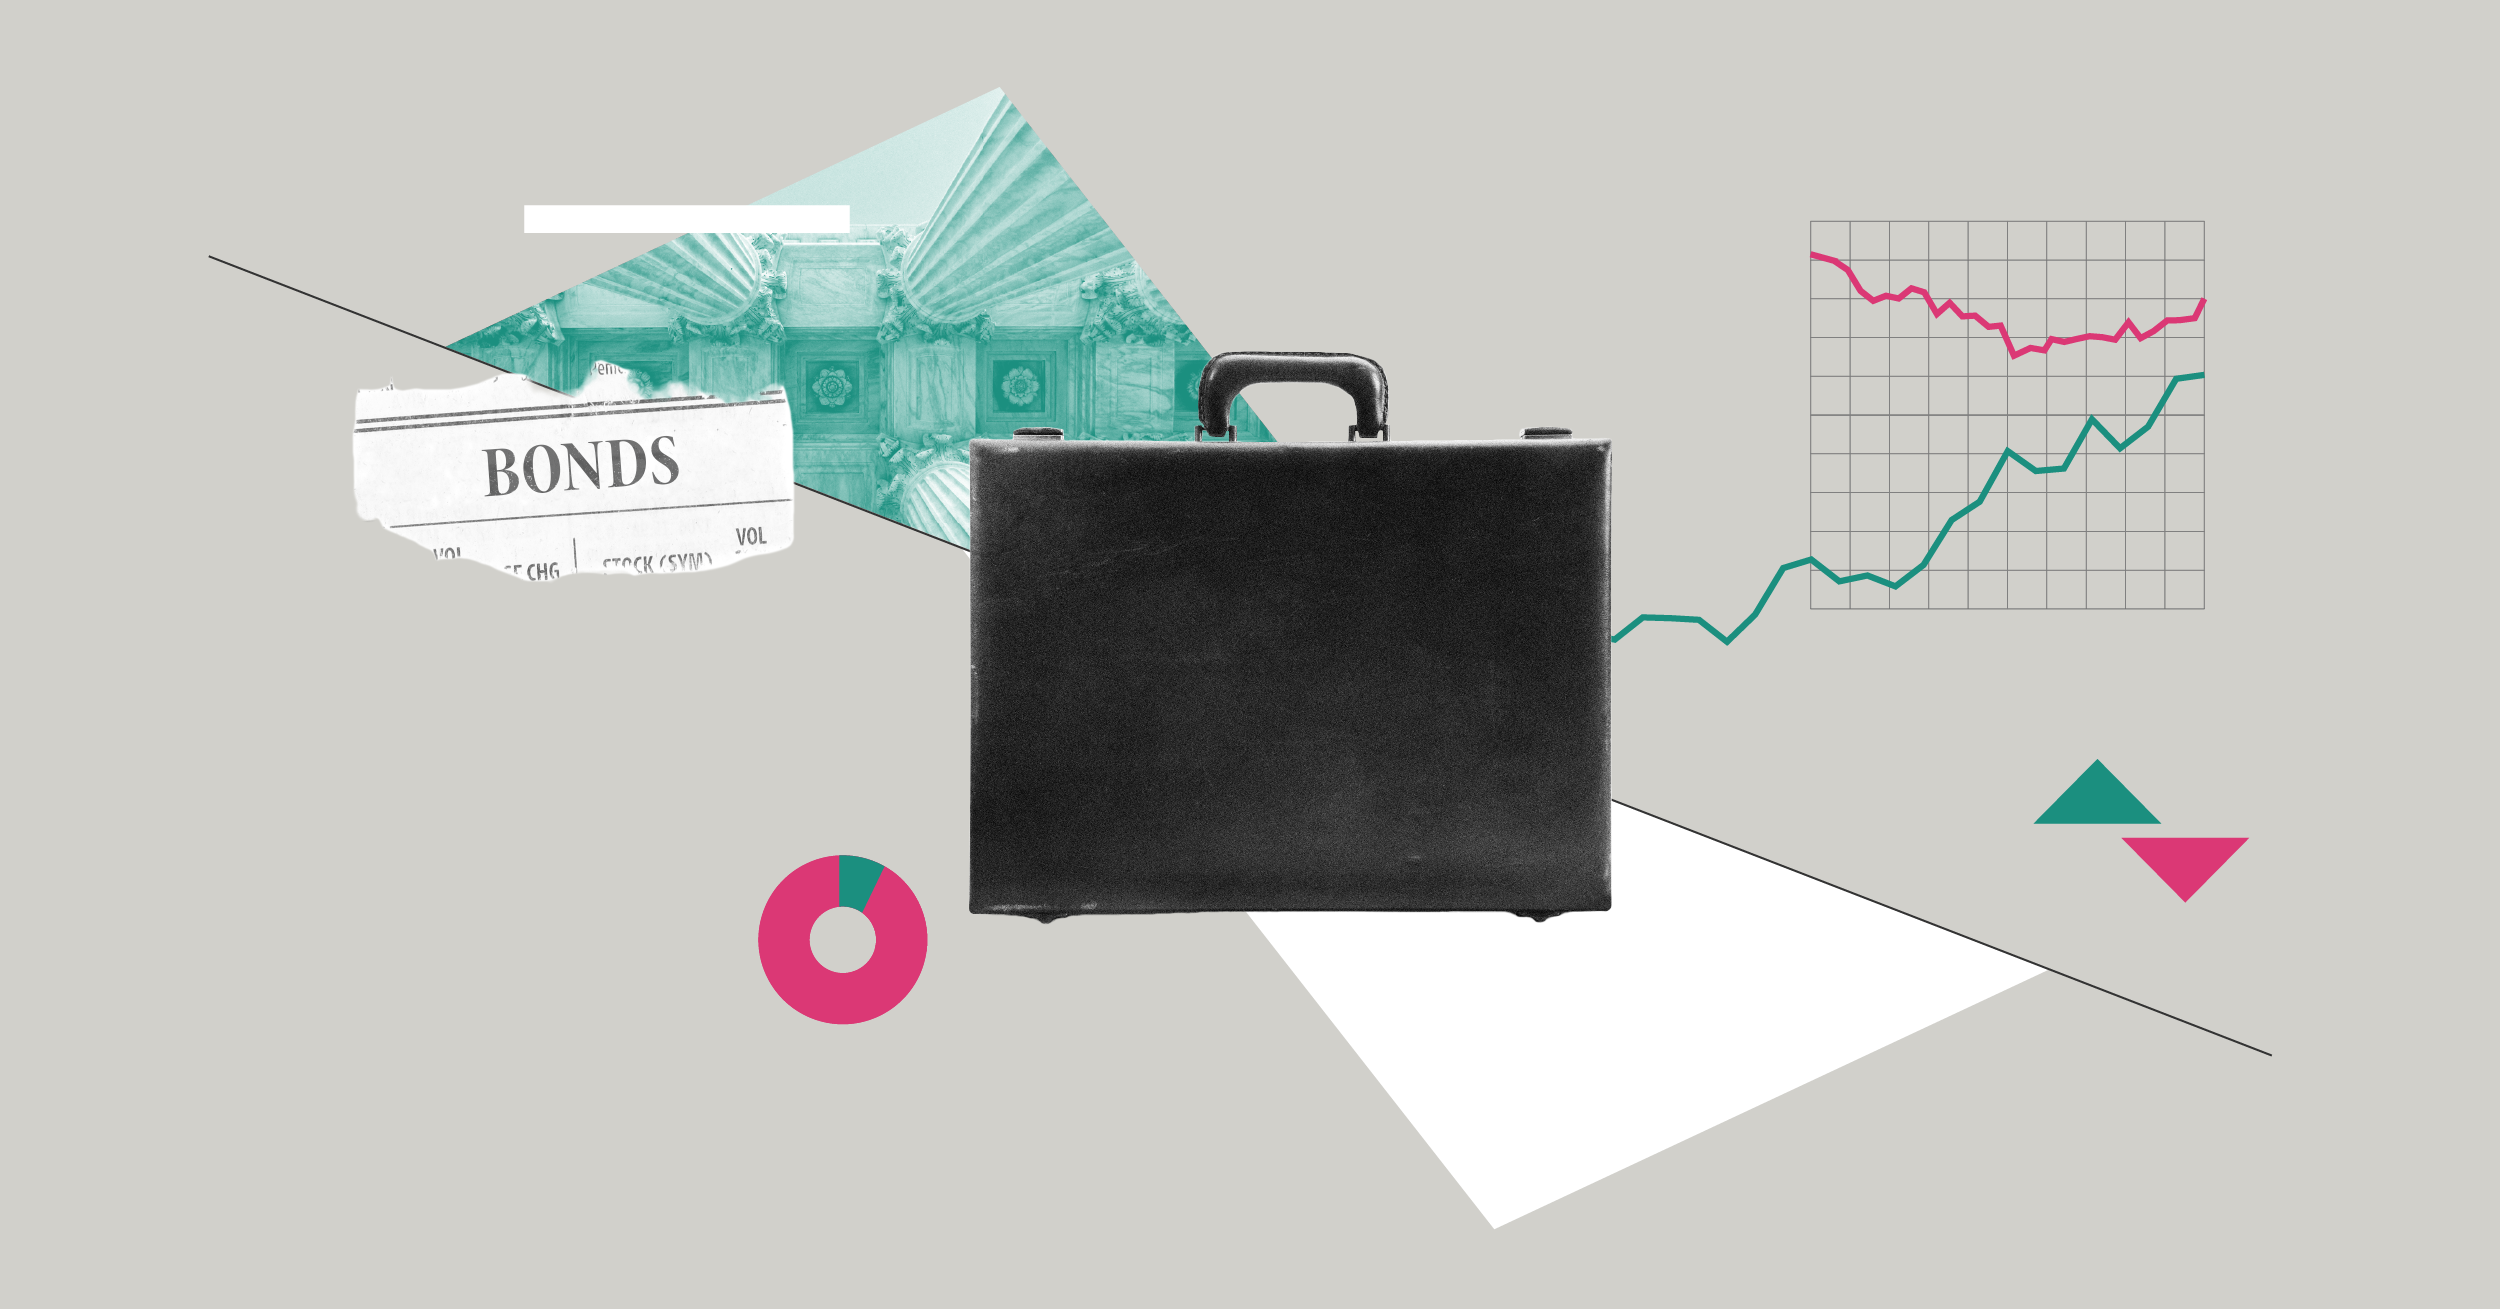 Collage featuring a briefcase, newspaper clipping about Bonds, and graphical elements.